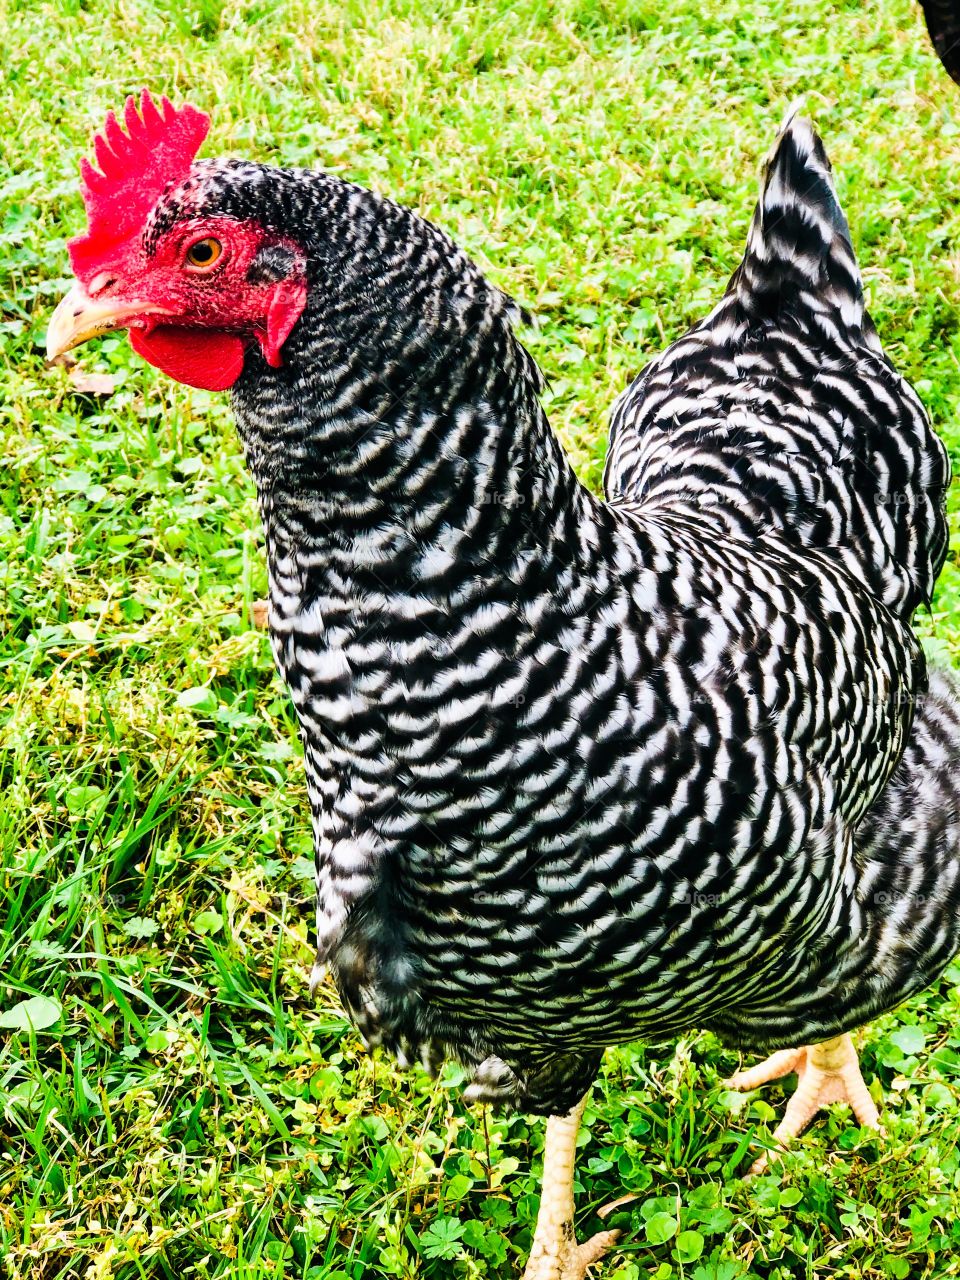 Black and white chicken with red head